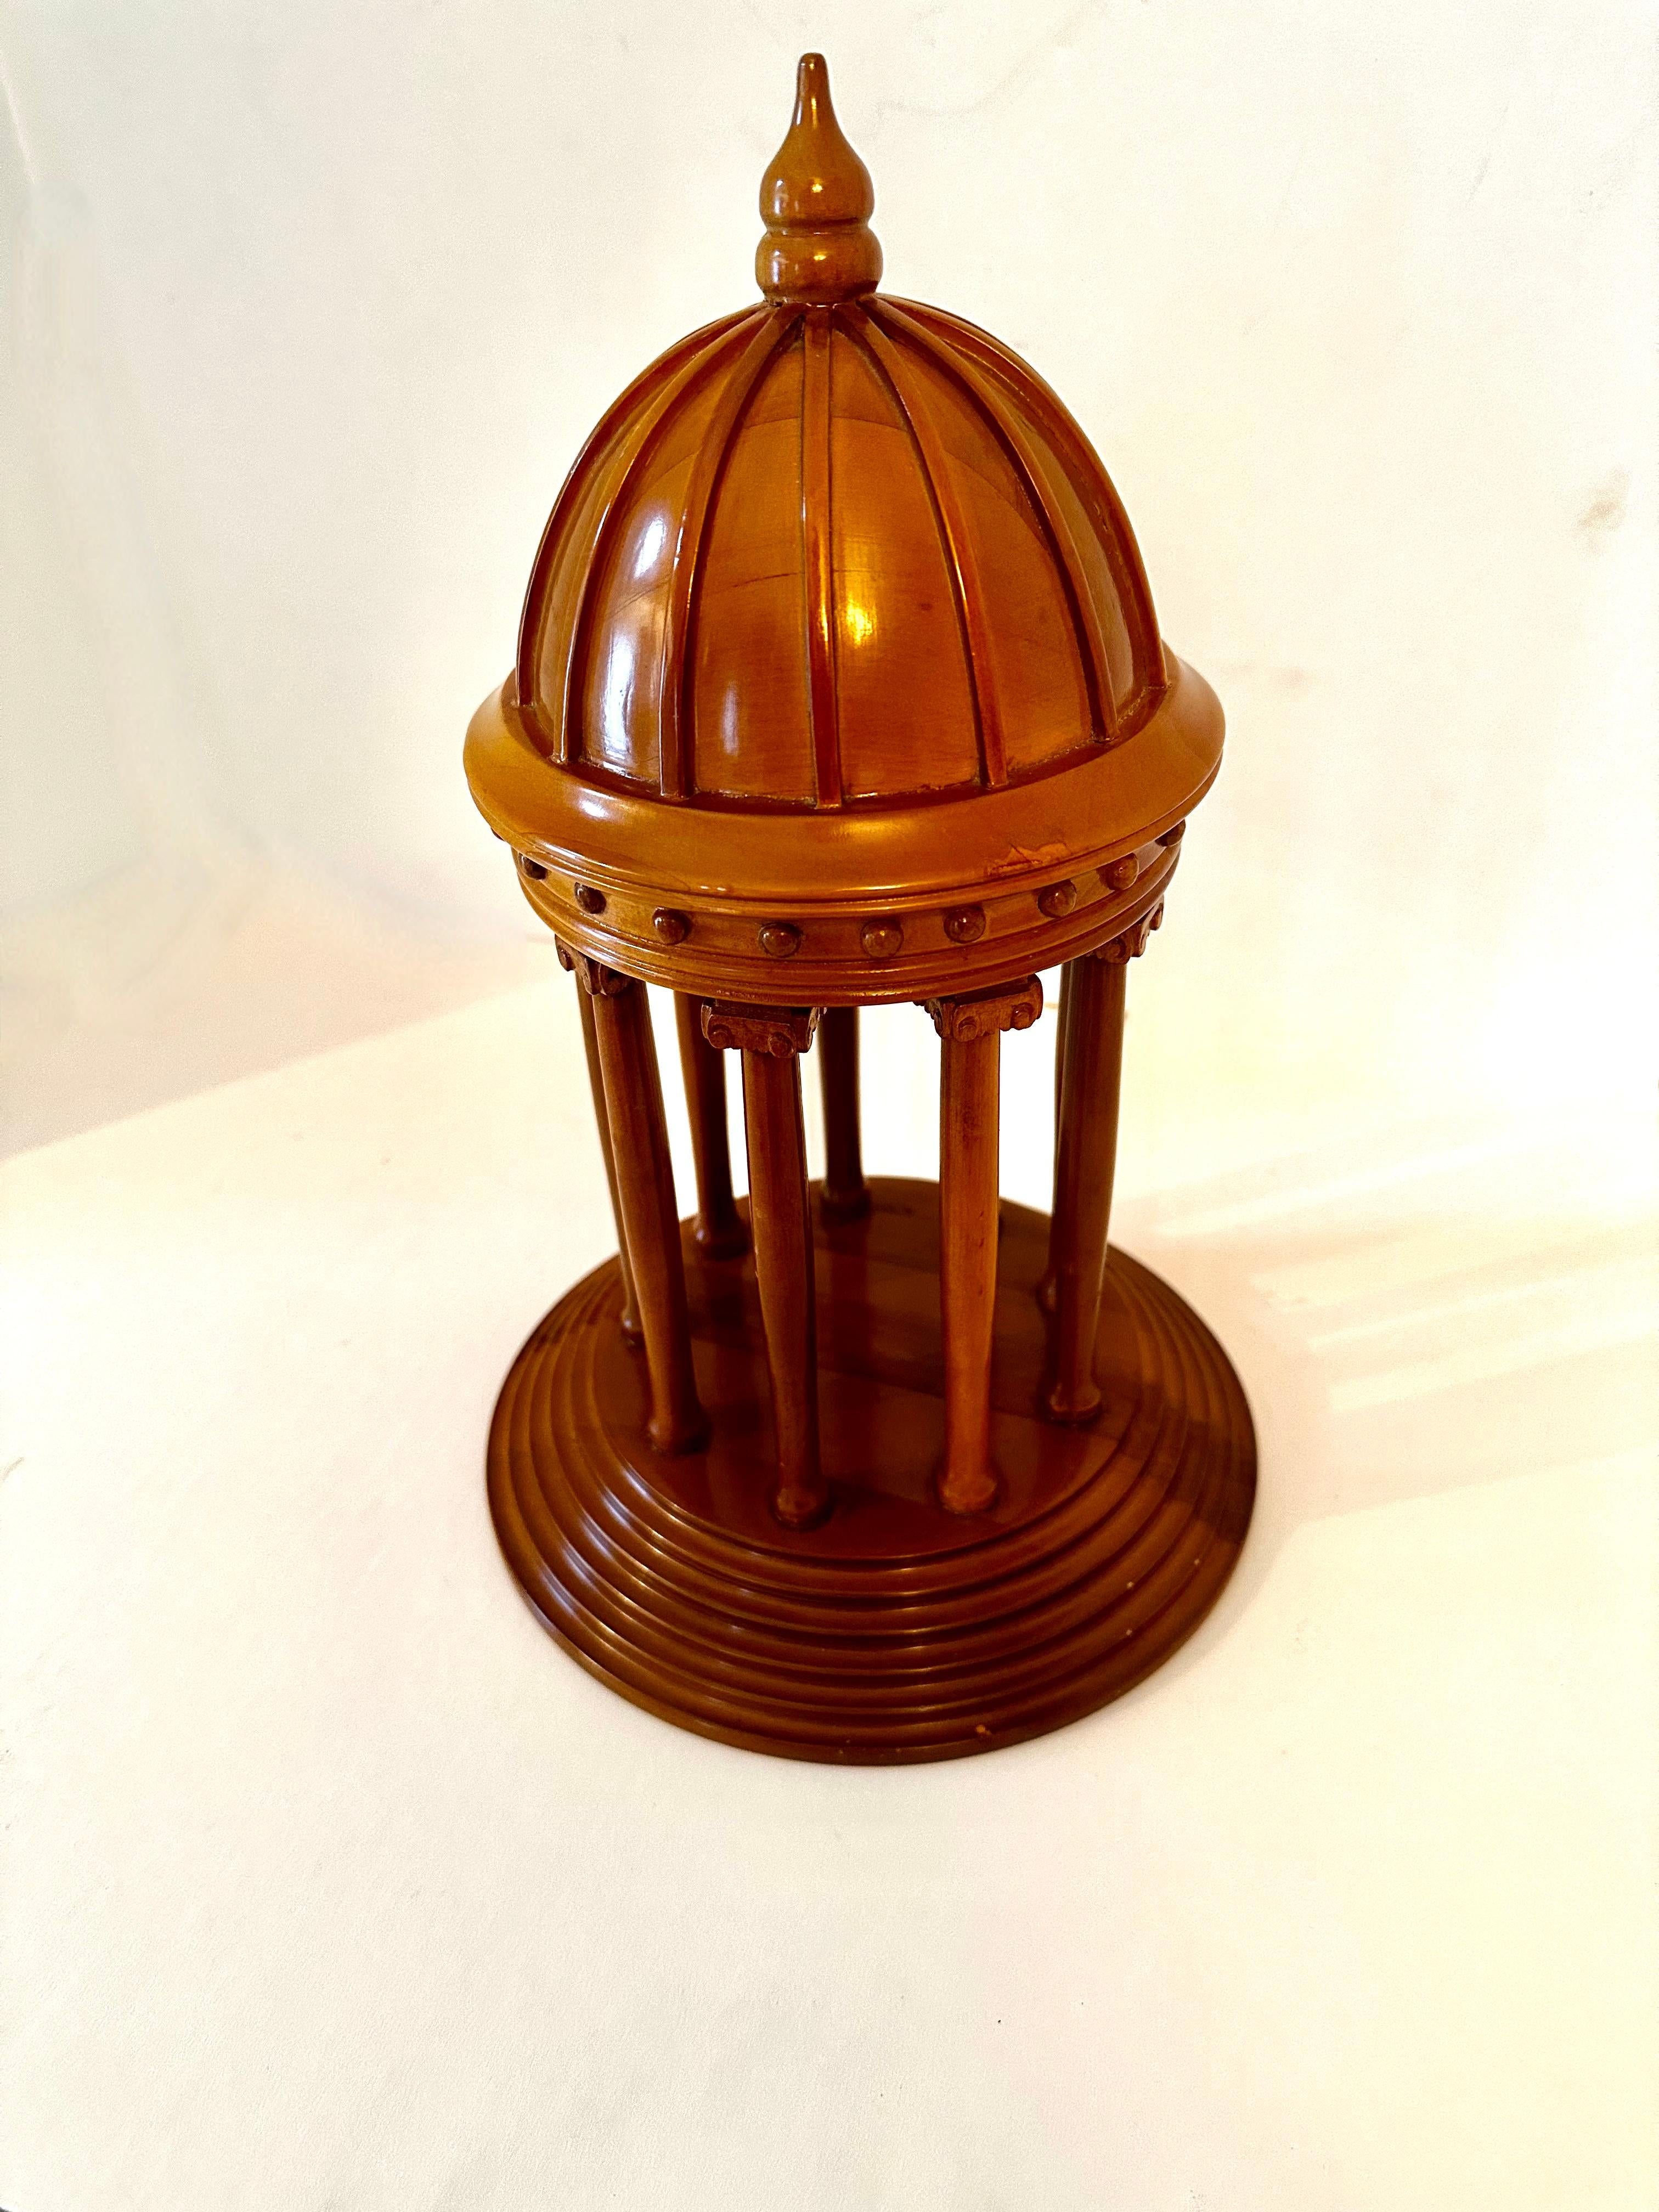 A wooden Domed architectural model or form. The piece is hand made with some carving. A nice element to add to a console table or in the den or study, and especially appealing to an architects office.

A very nice piece, could possibly house